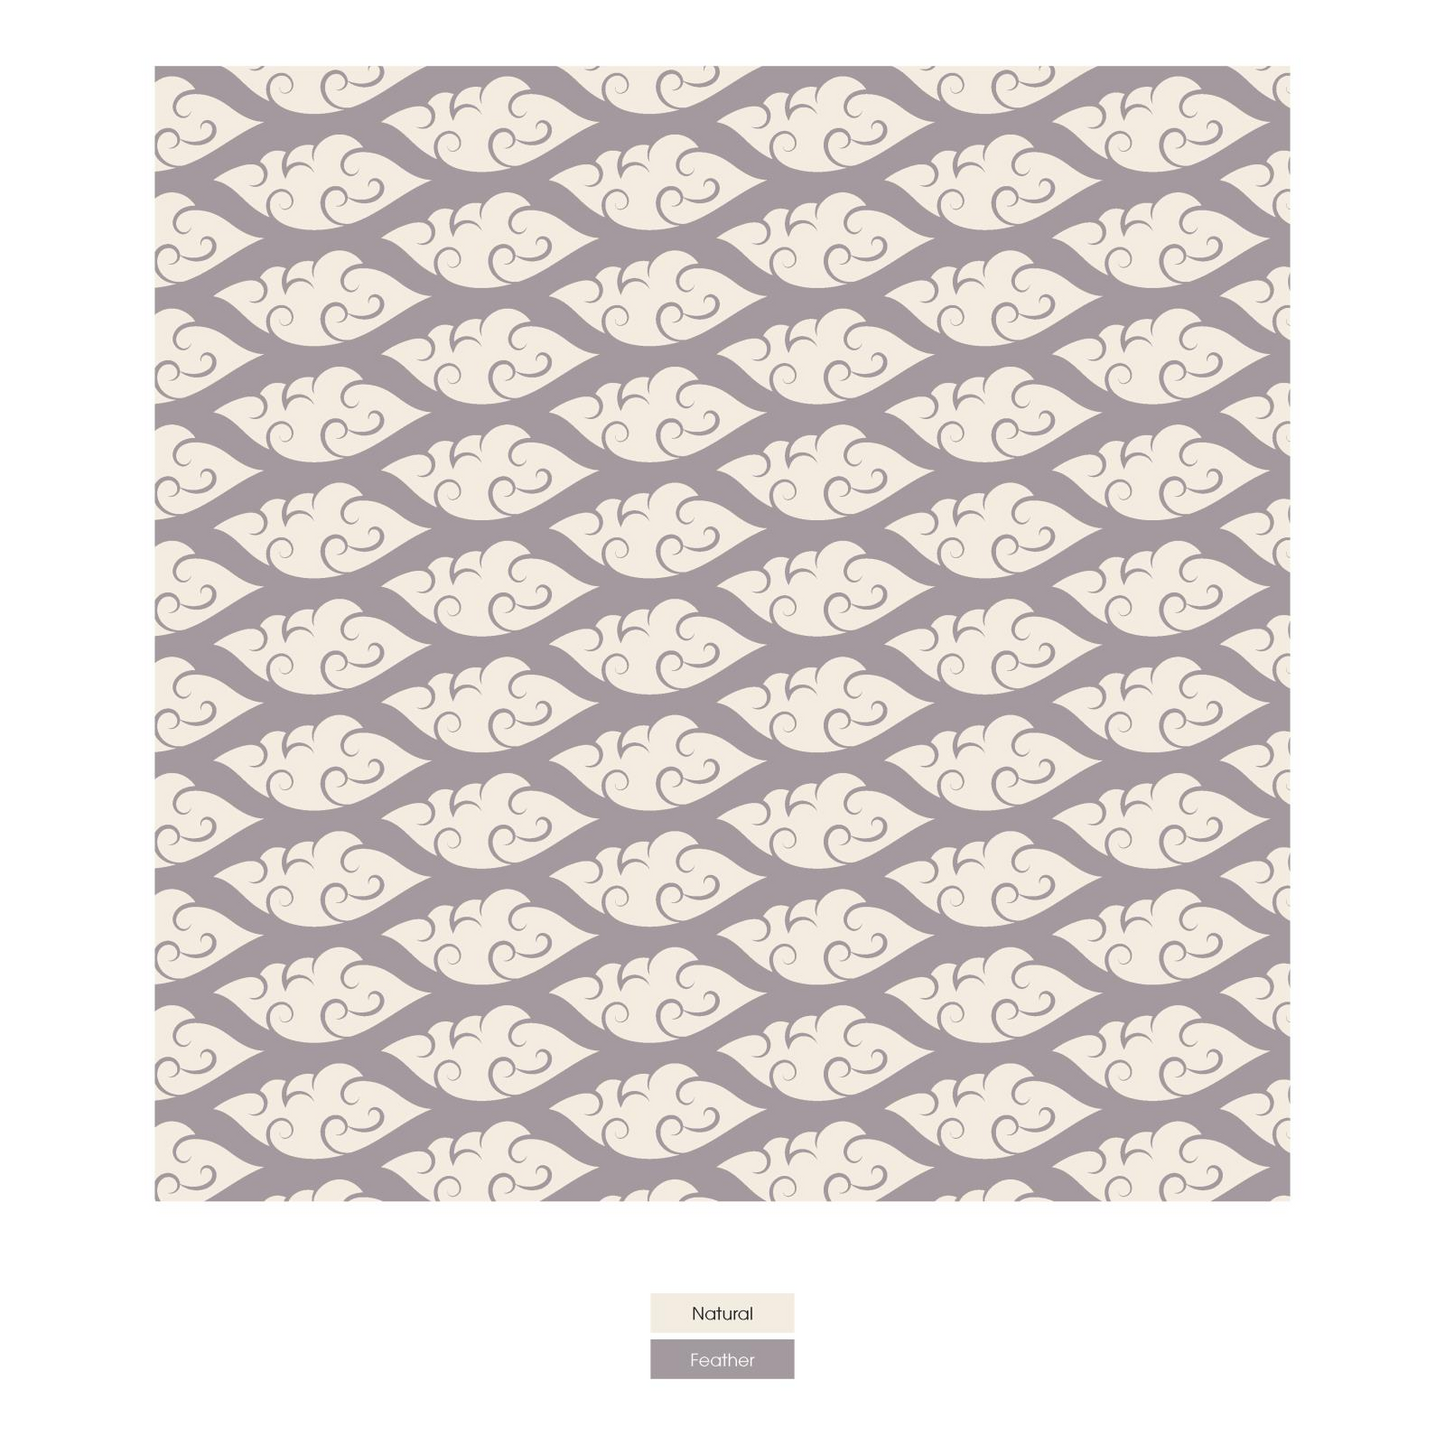 Bamboo Print Stroller Blanket: Feather Cloudy Sea